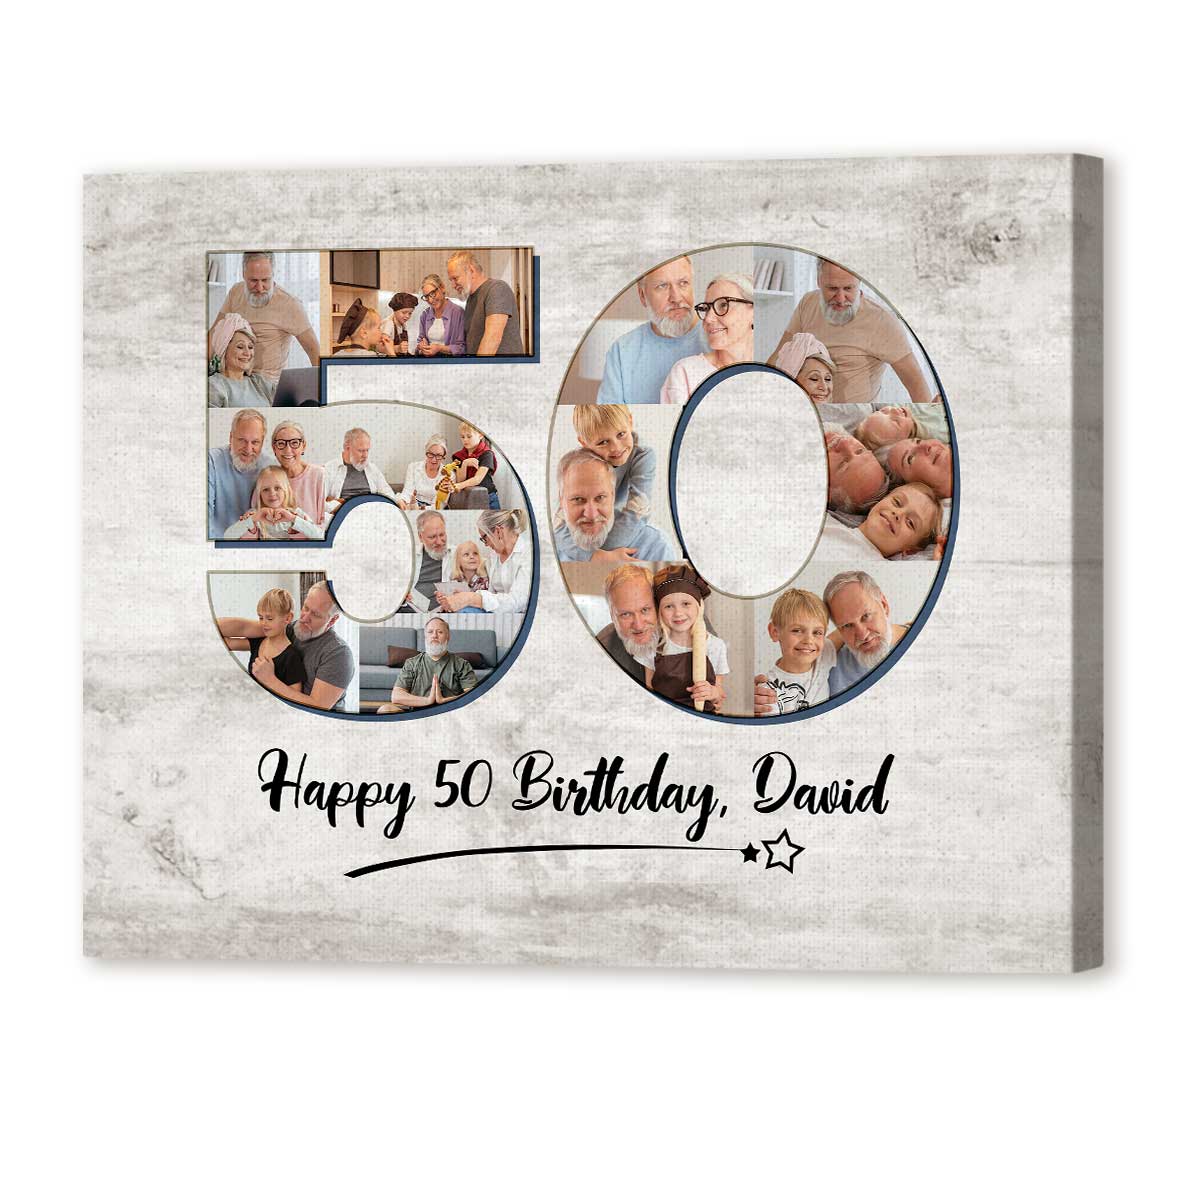 https://benicee.com/wp-content/uploads/2022/10/6cc0c206-4720-11ed-83ba-0242ac120002__Personalized-50th-Birthday-Gift-For-Men-For-Dad-50th-Birthday-Custom-Photo-Collage-Canvas-50th-Birthday-Gift-Ideas-2.jpg